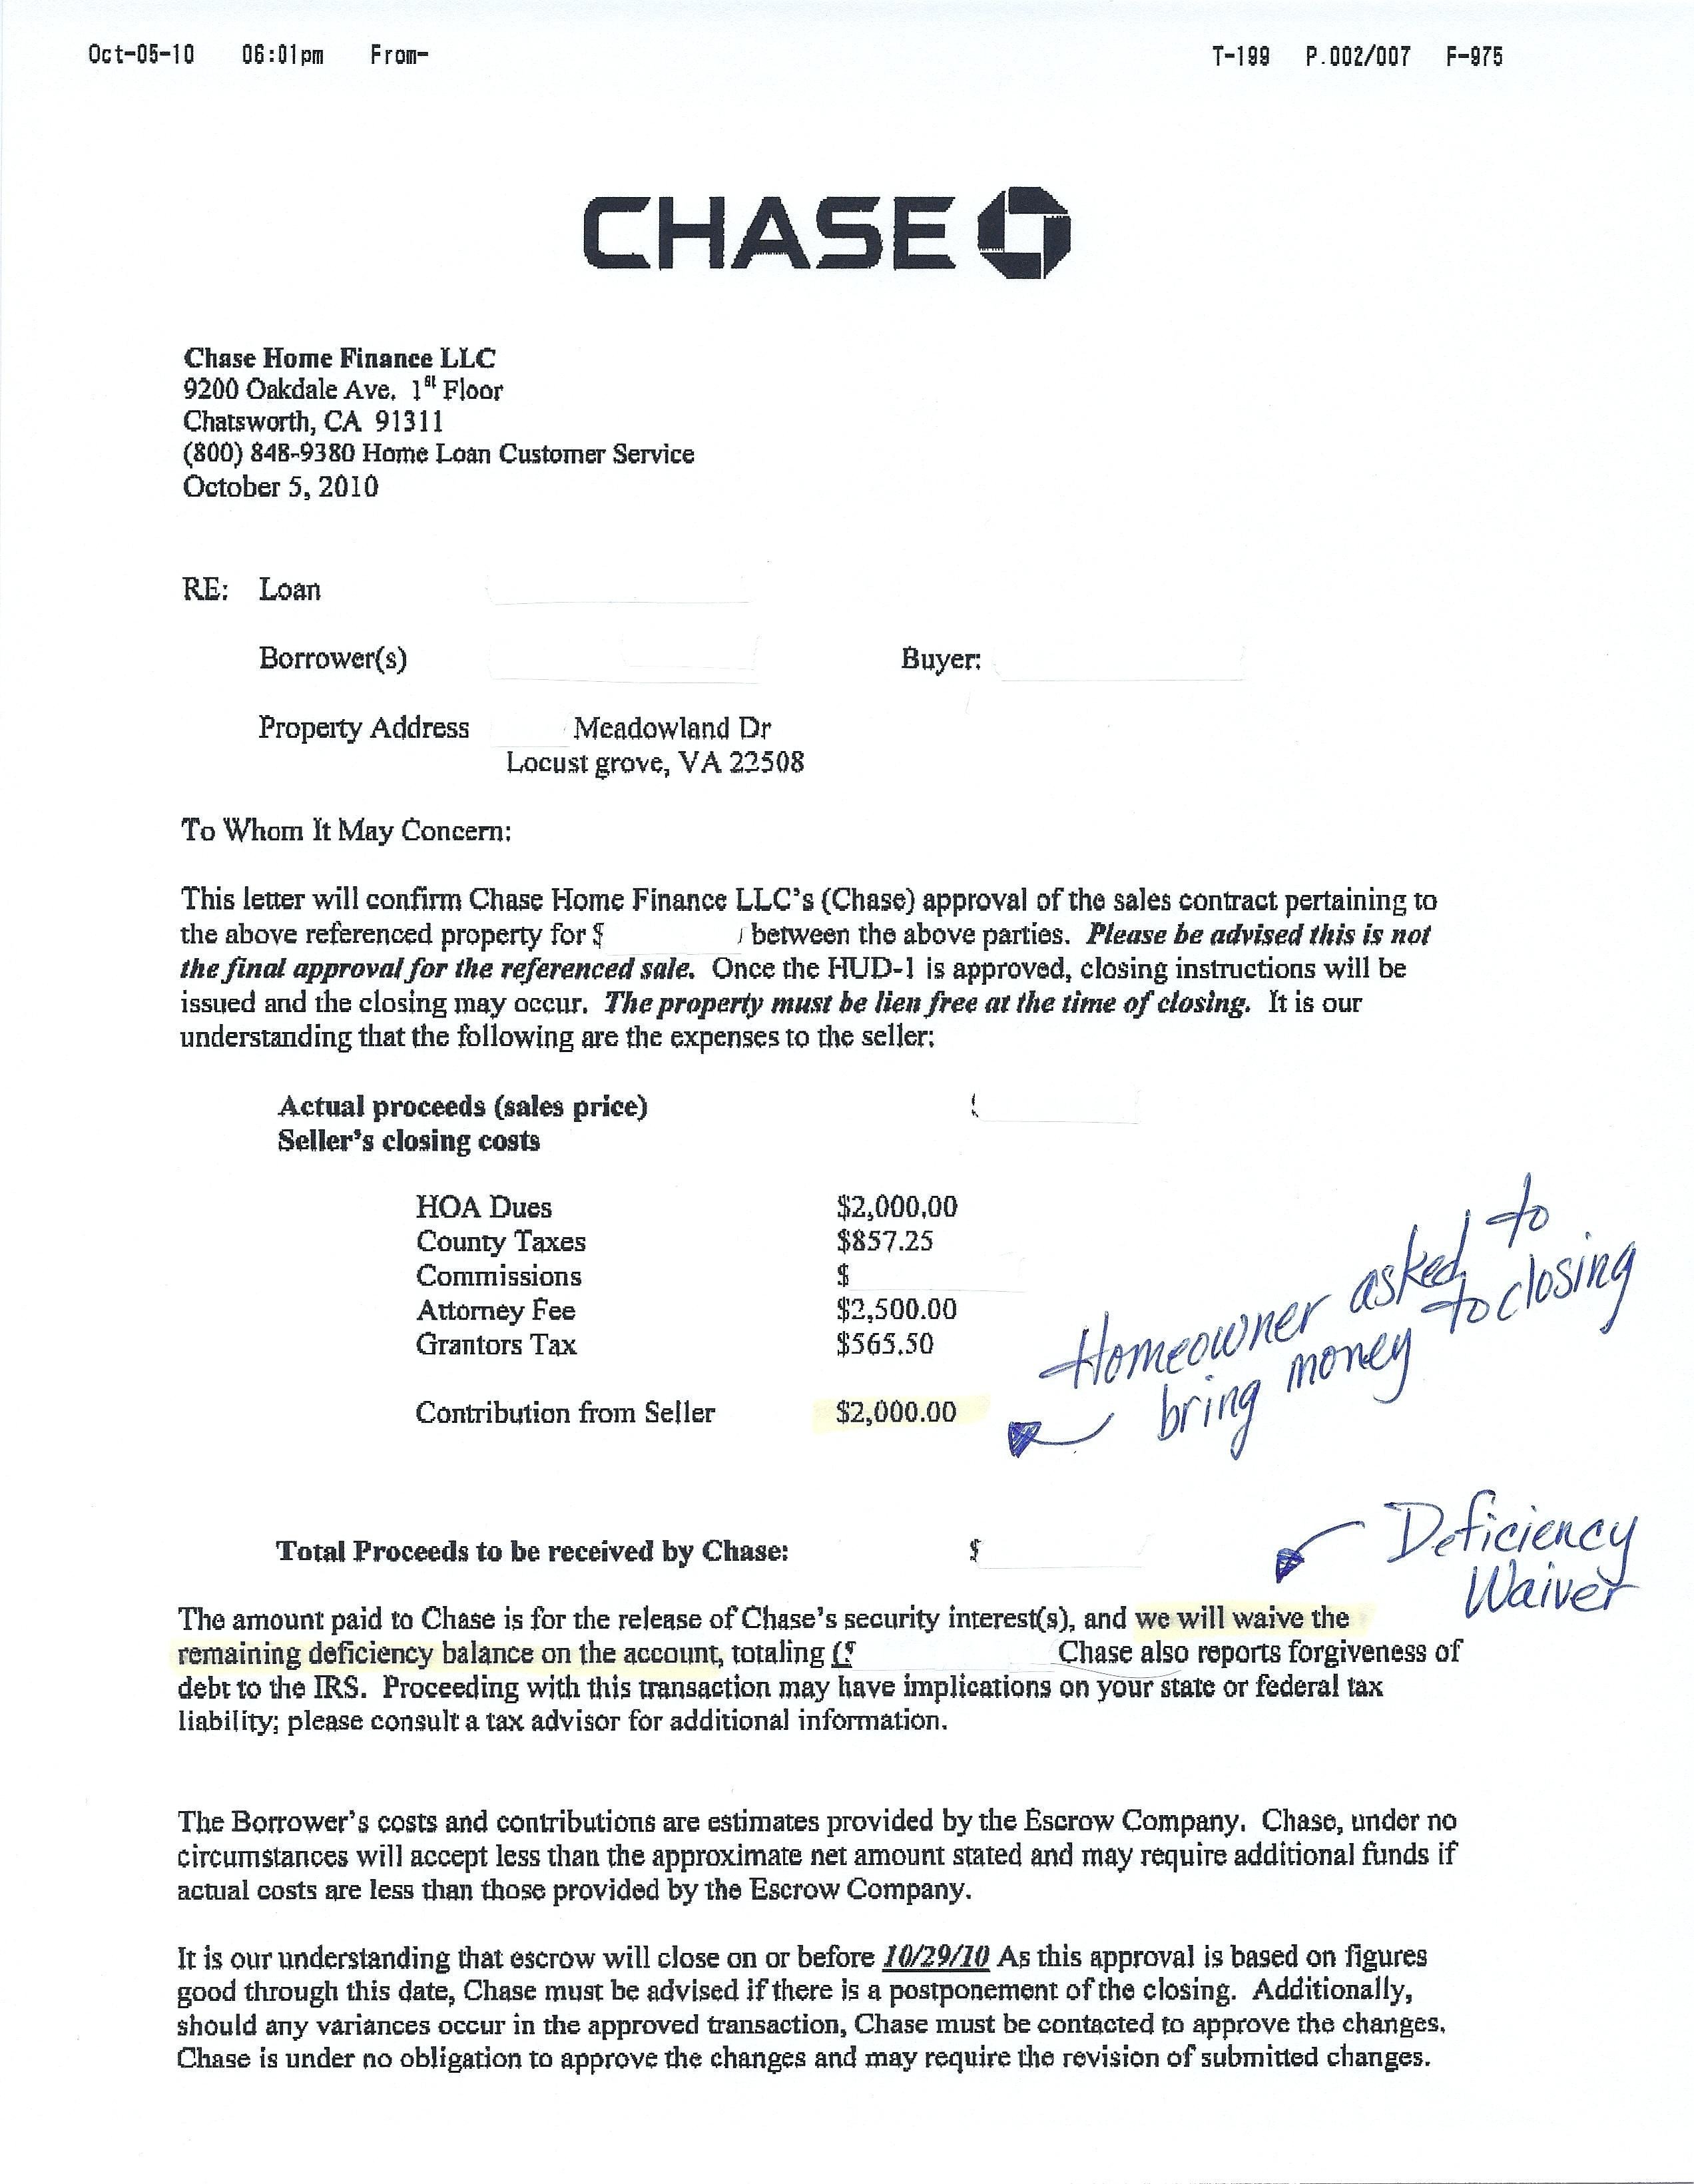 Mortgage Pre Approval Letter